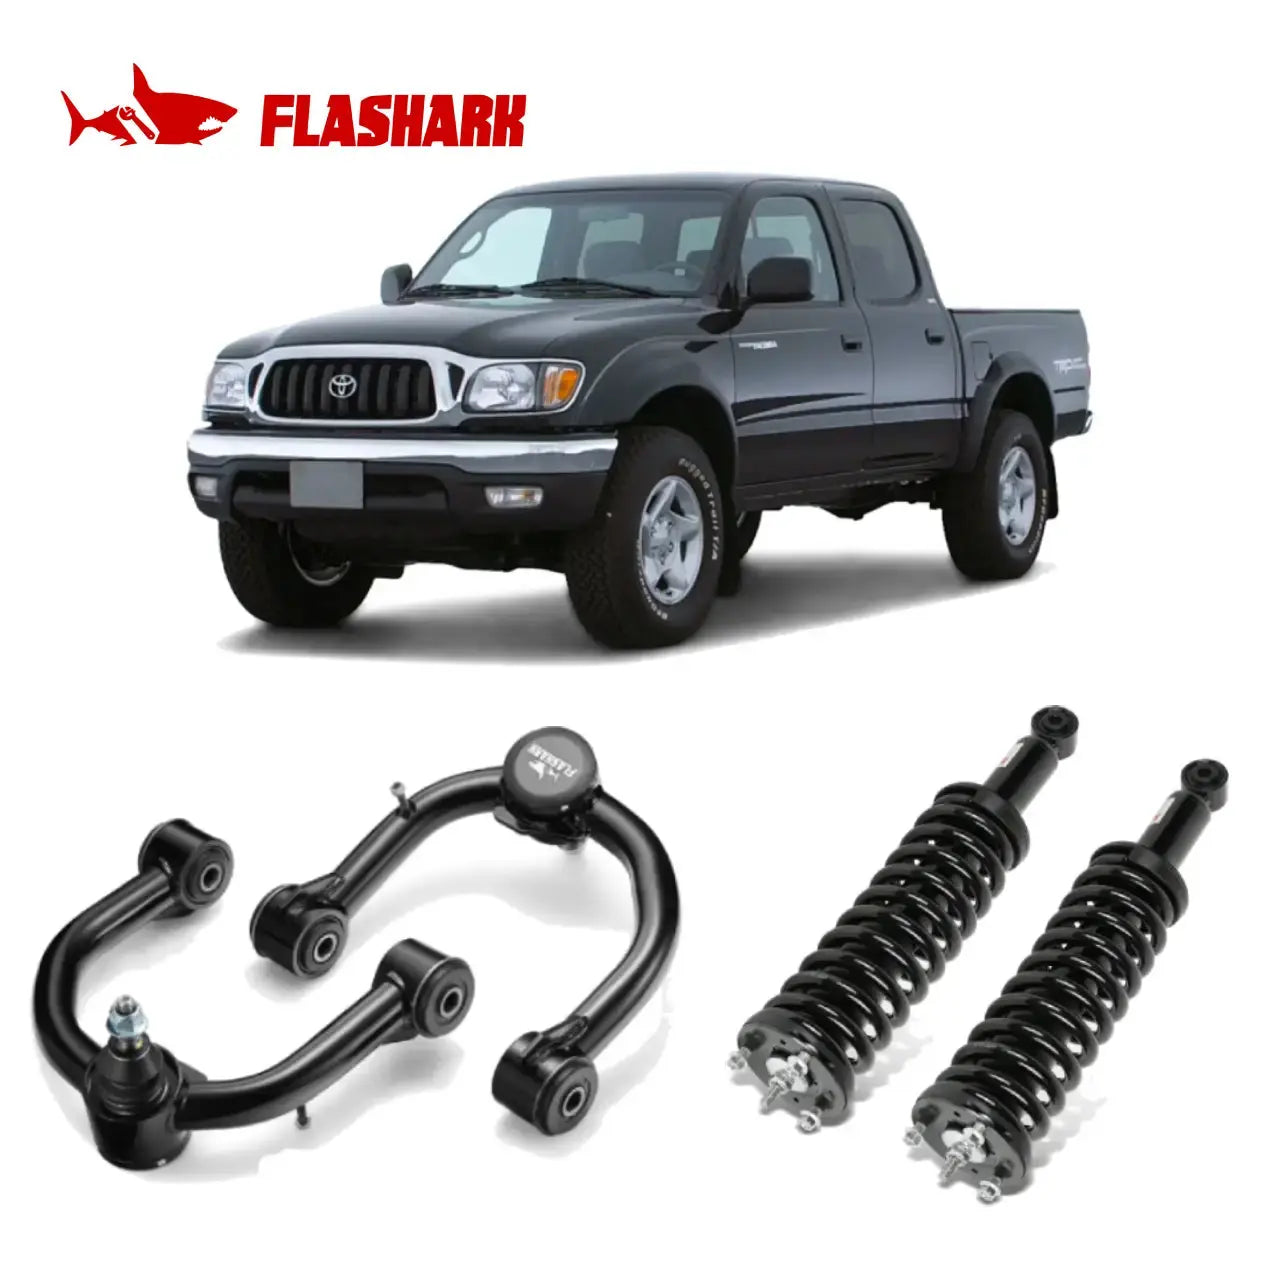 Exhaust Header/Front Strut/Upper Control Arms All-In-One Kit for 1995-2001 Toyota Tacoma 2.4L/2.7L L4 Flashark